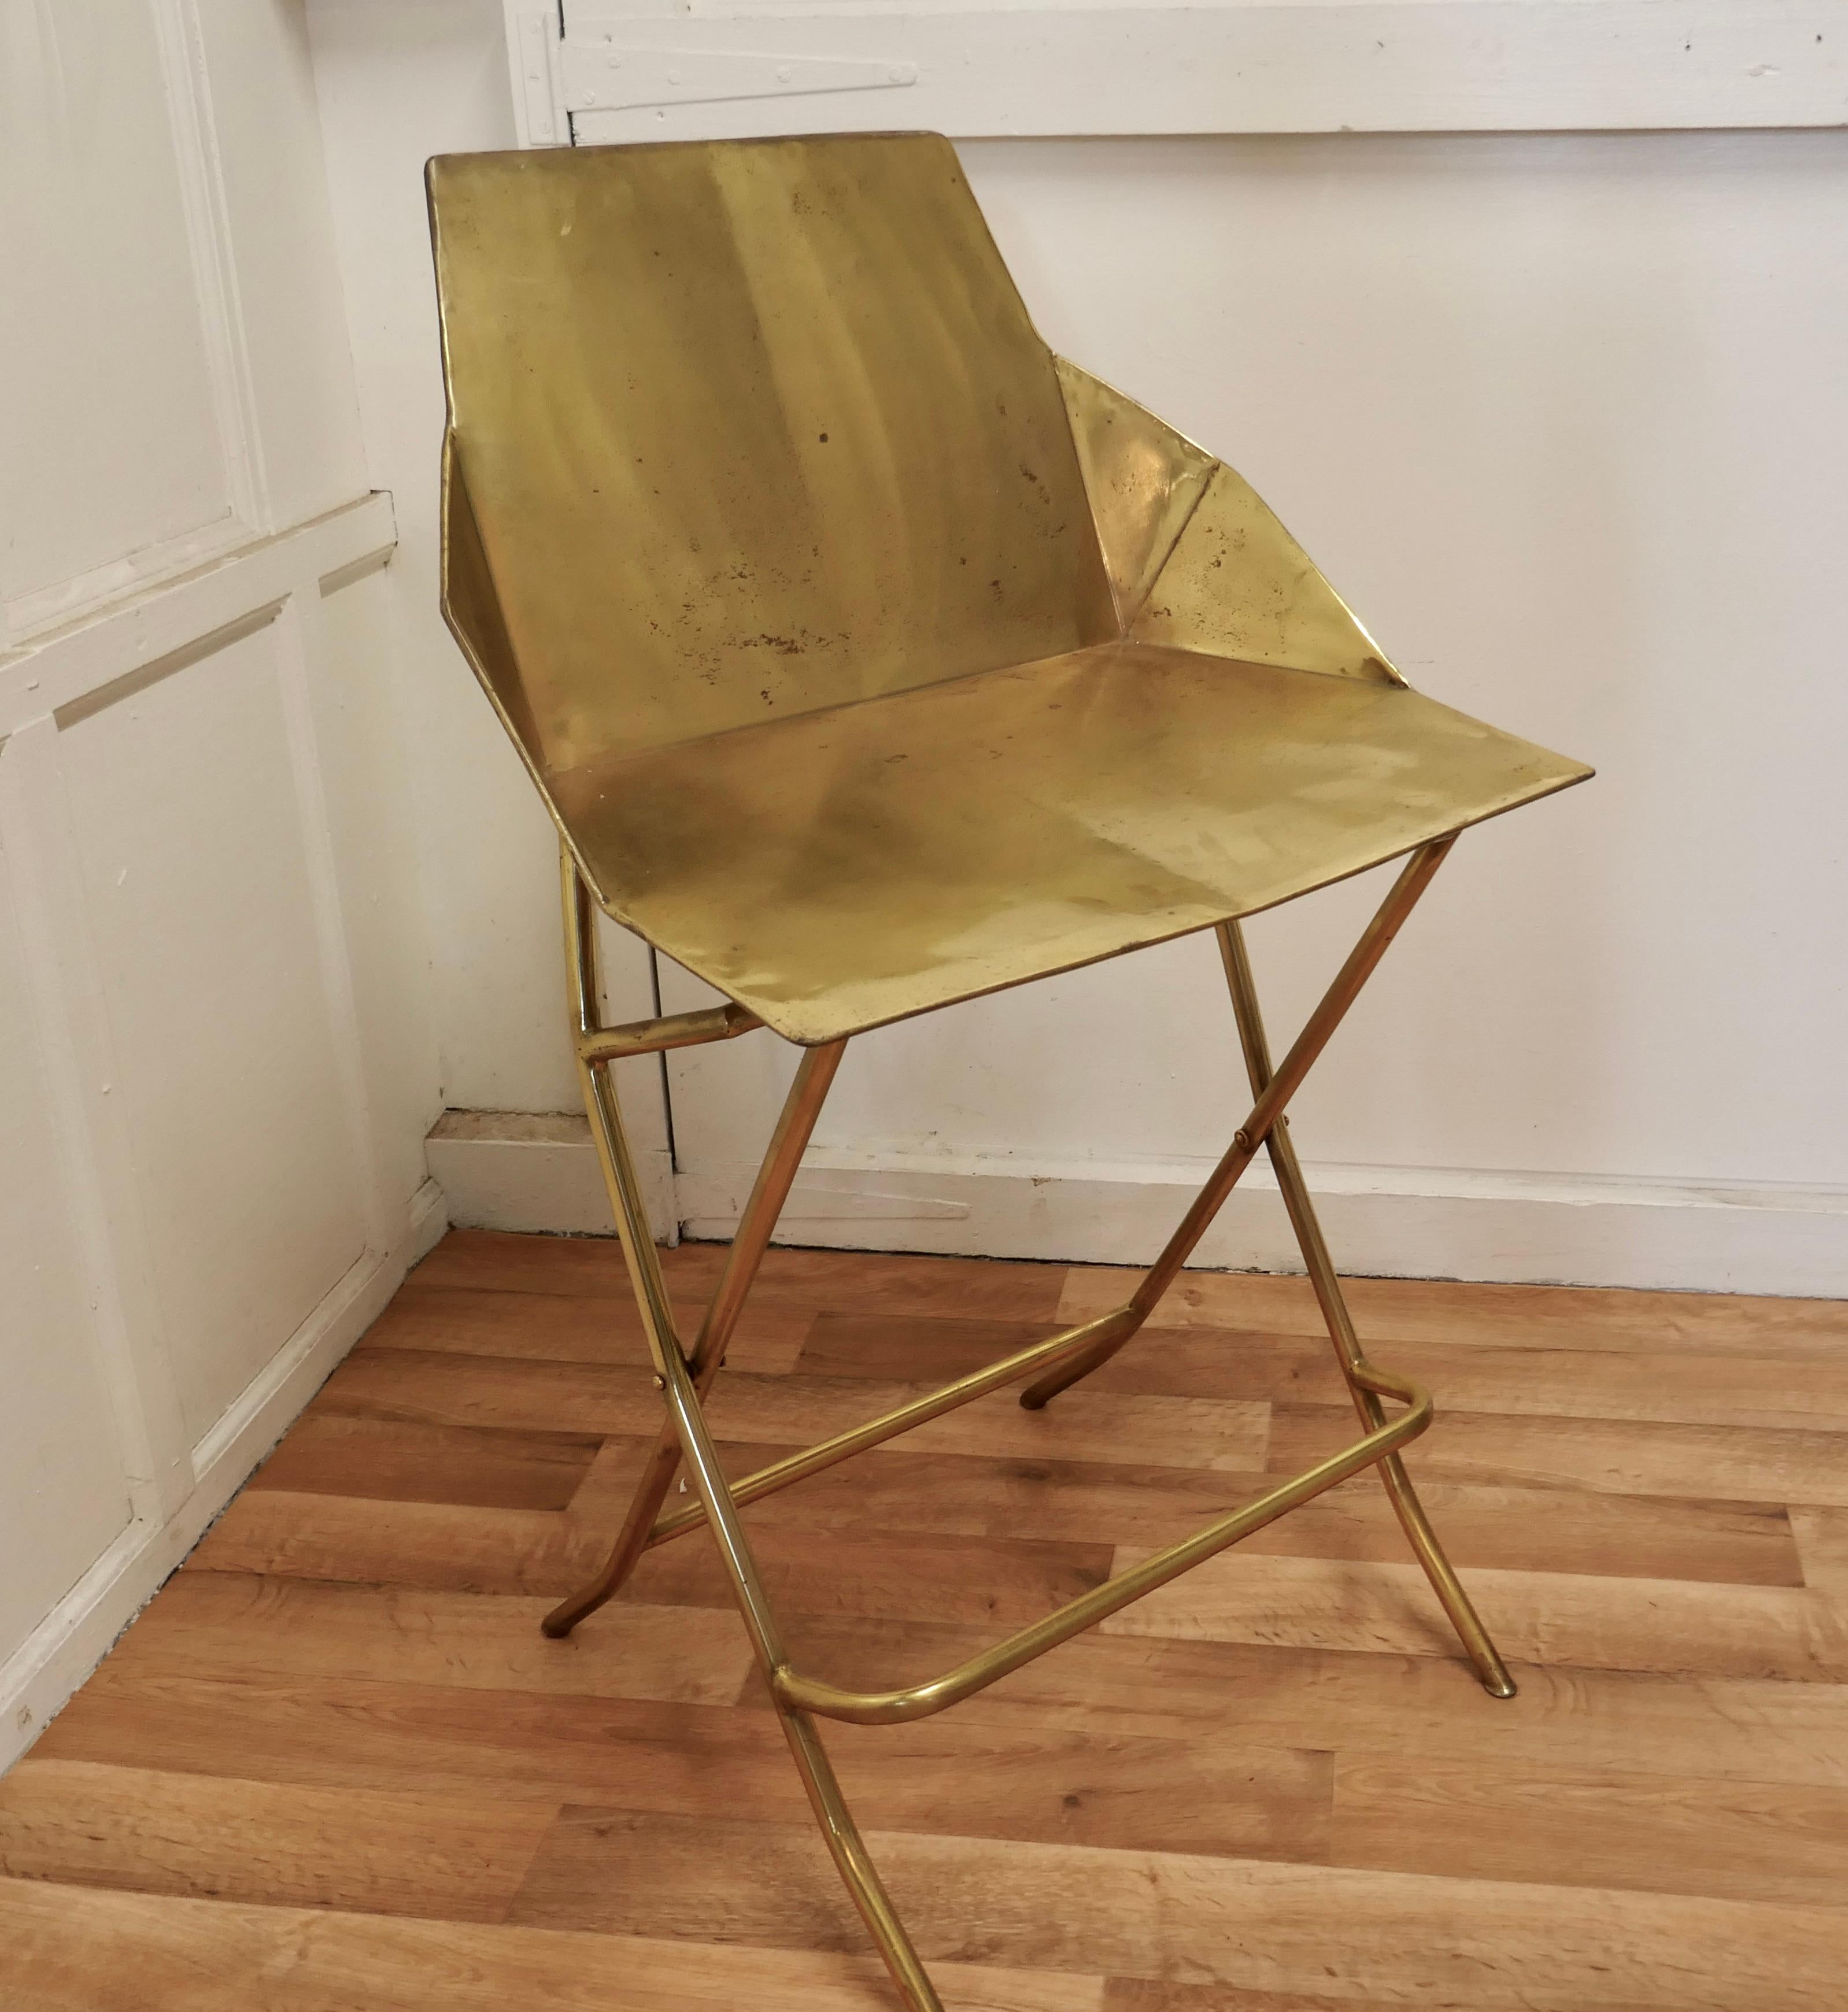 Unusual brass adjustable designer chair.

A very unusual piece, this chair is all made in brass, the seat can be set to 2 different heights either to suit a Bar or a Table ( very handy for kitchen use)
The chair has a foot support rail, a flat